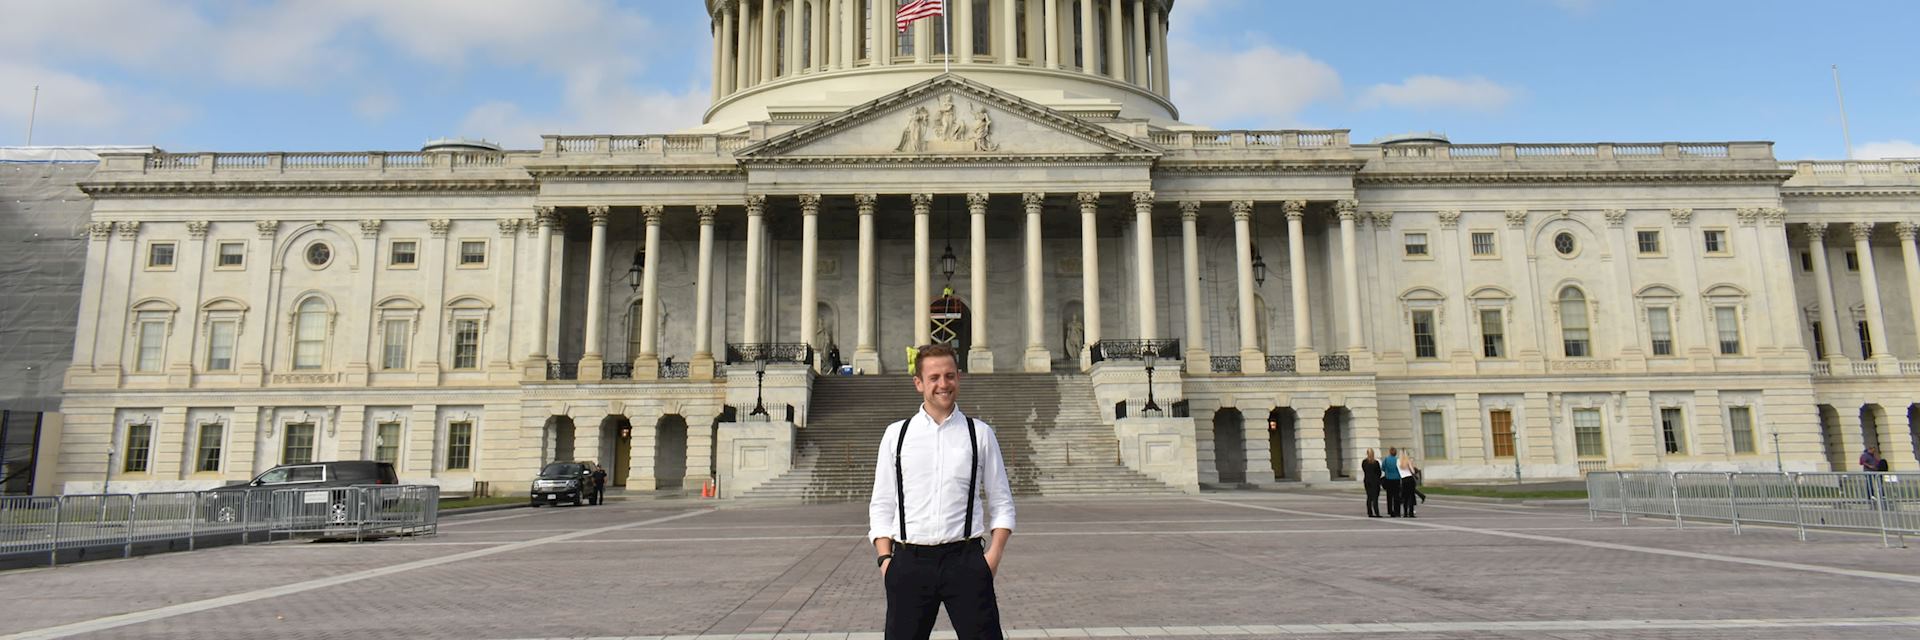 Dean outside the Capitol Building in Washington D.C.